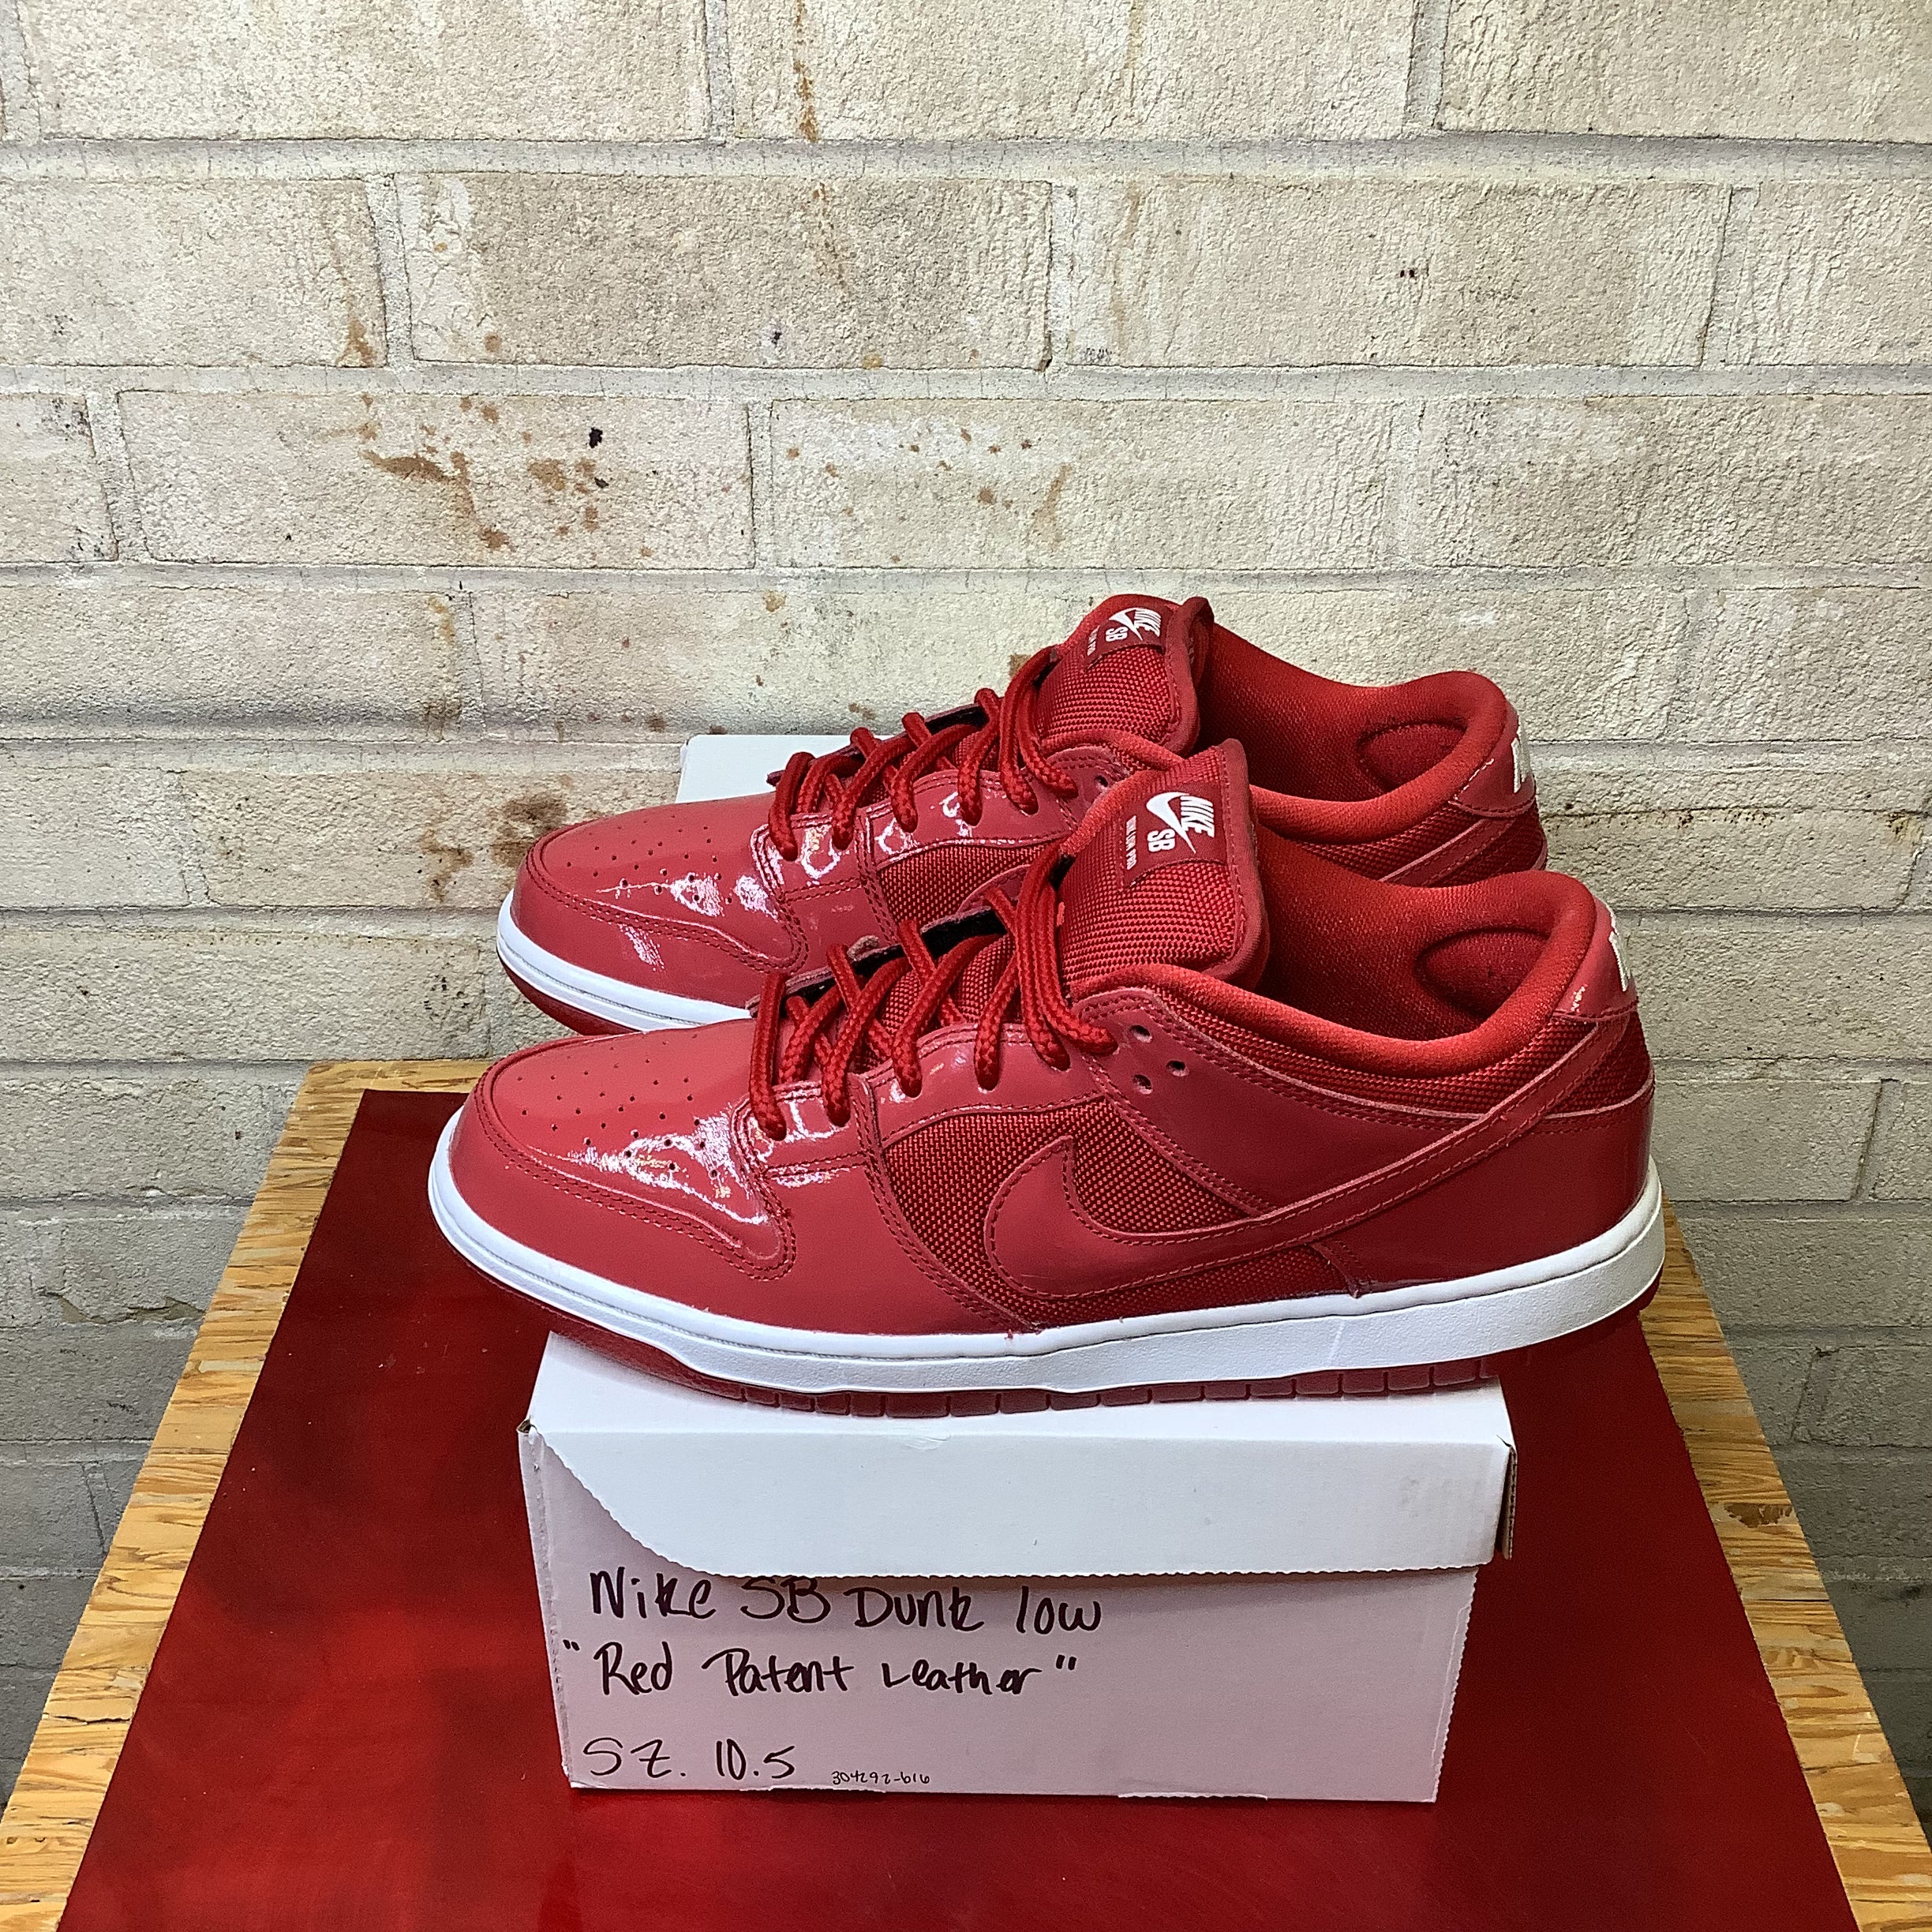 NIKE SB DUNK LOW RED PATENT LEATHER SIZE 10.5 304292-616